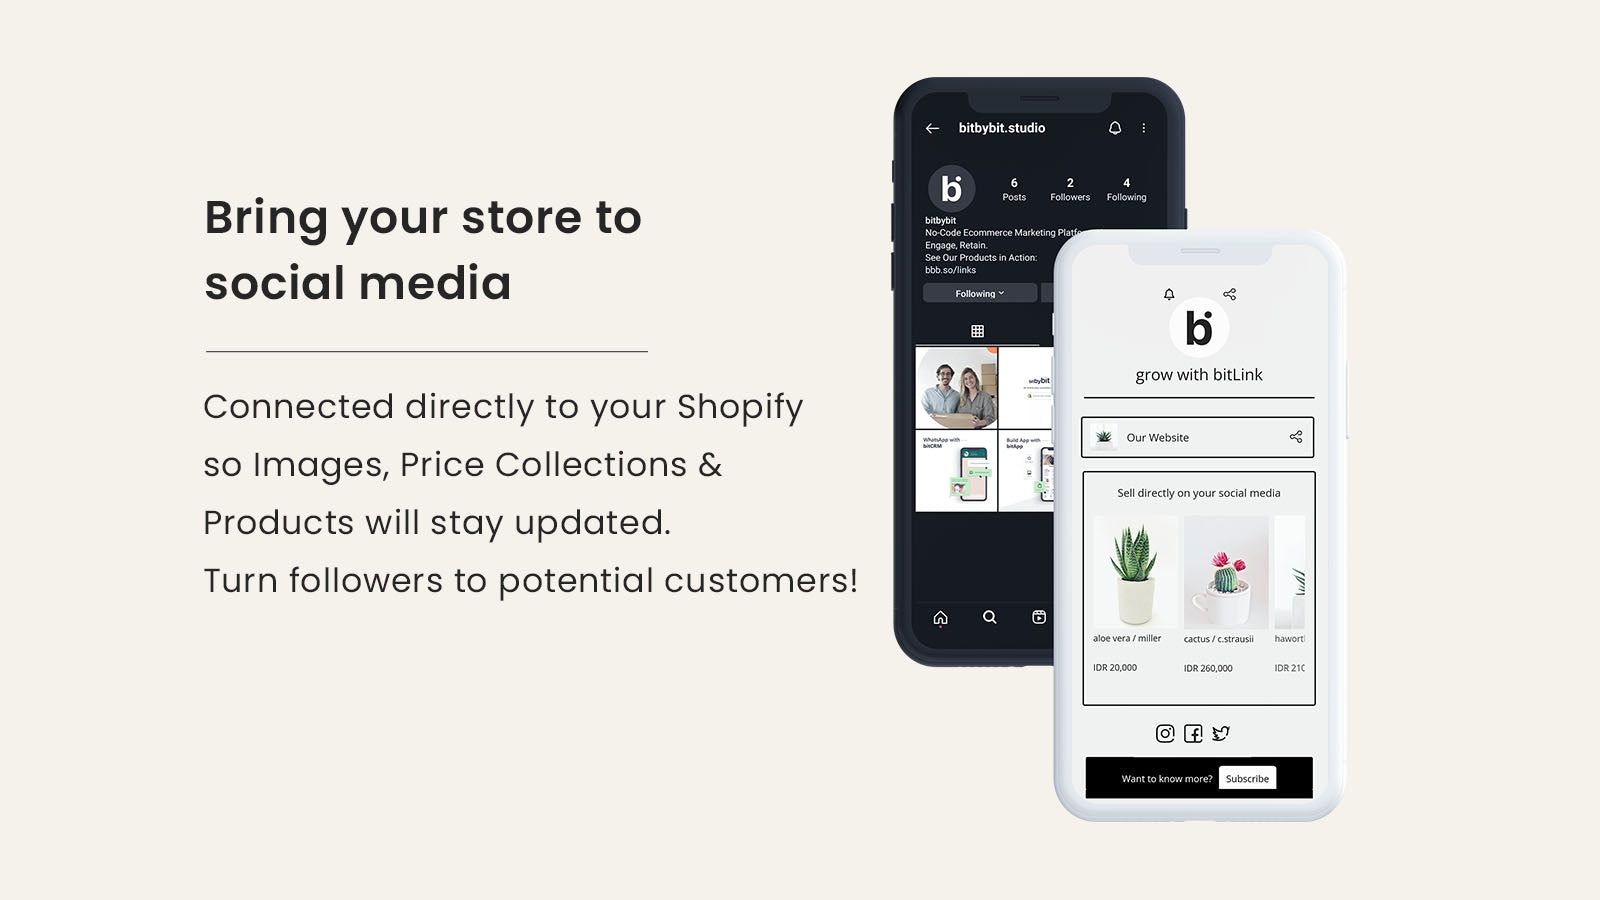 Bring your own store to social media